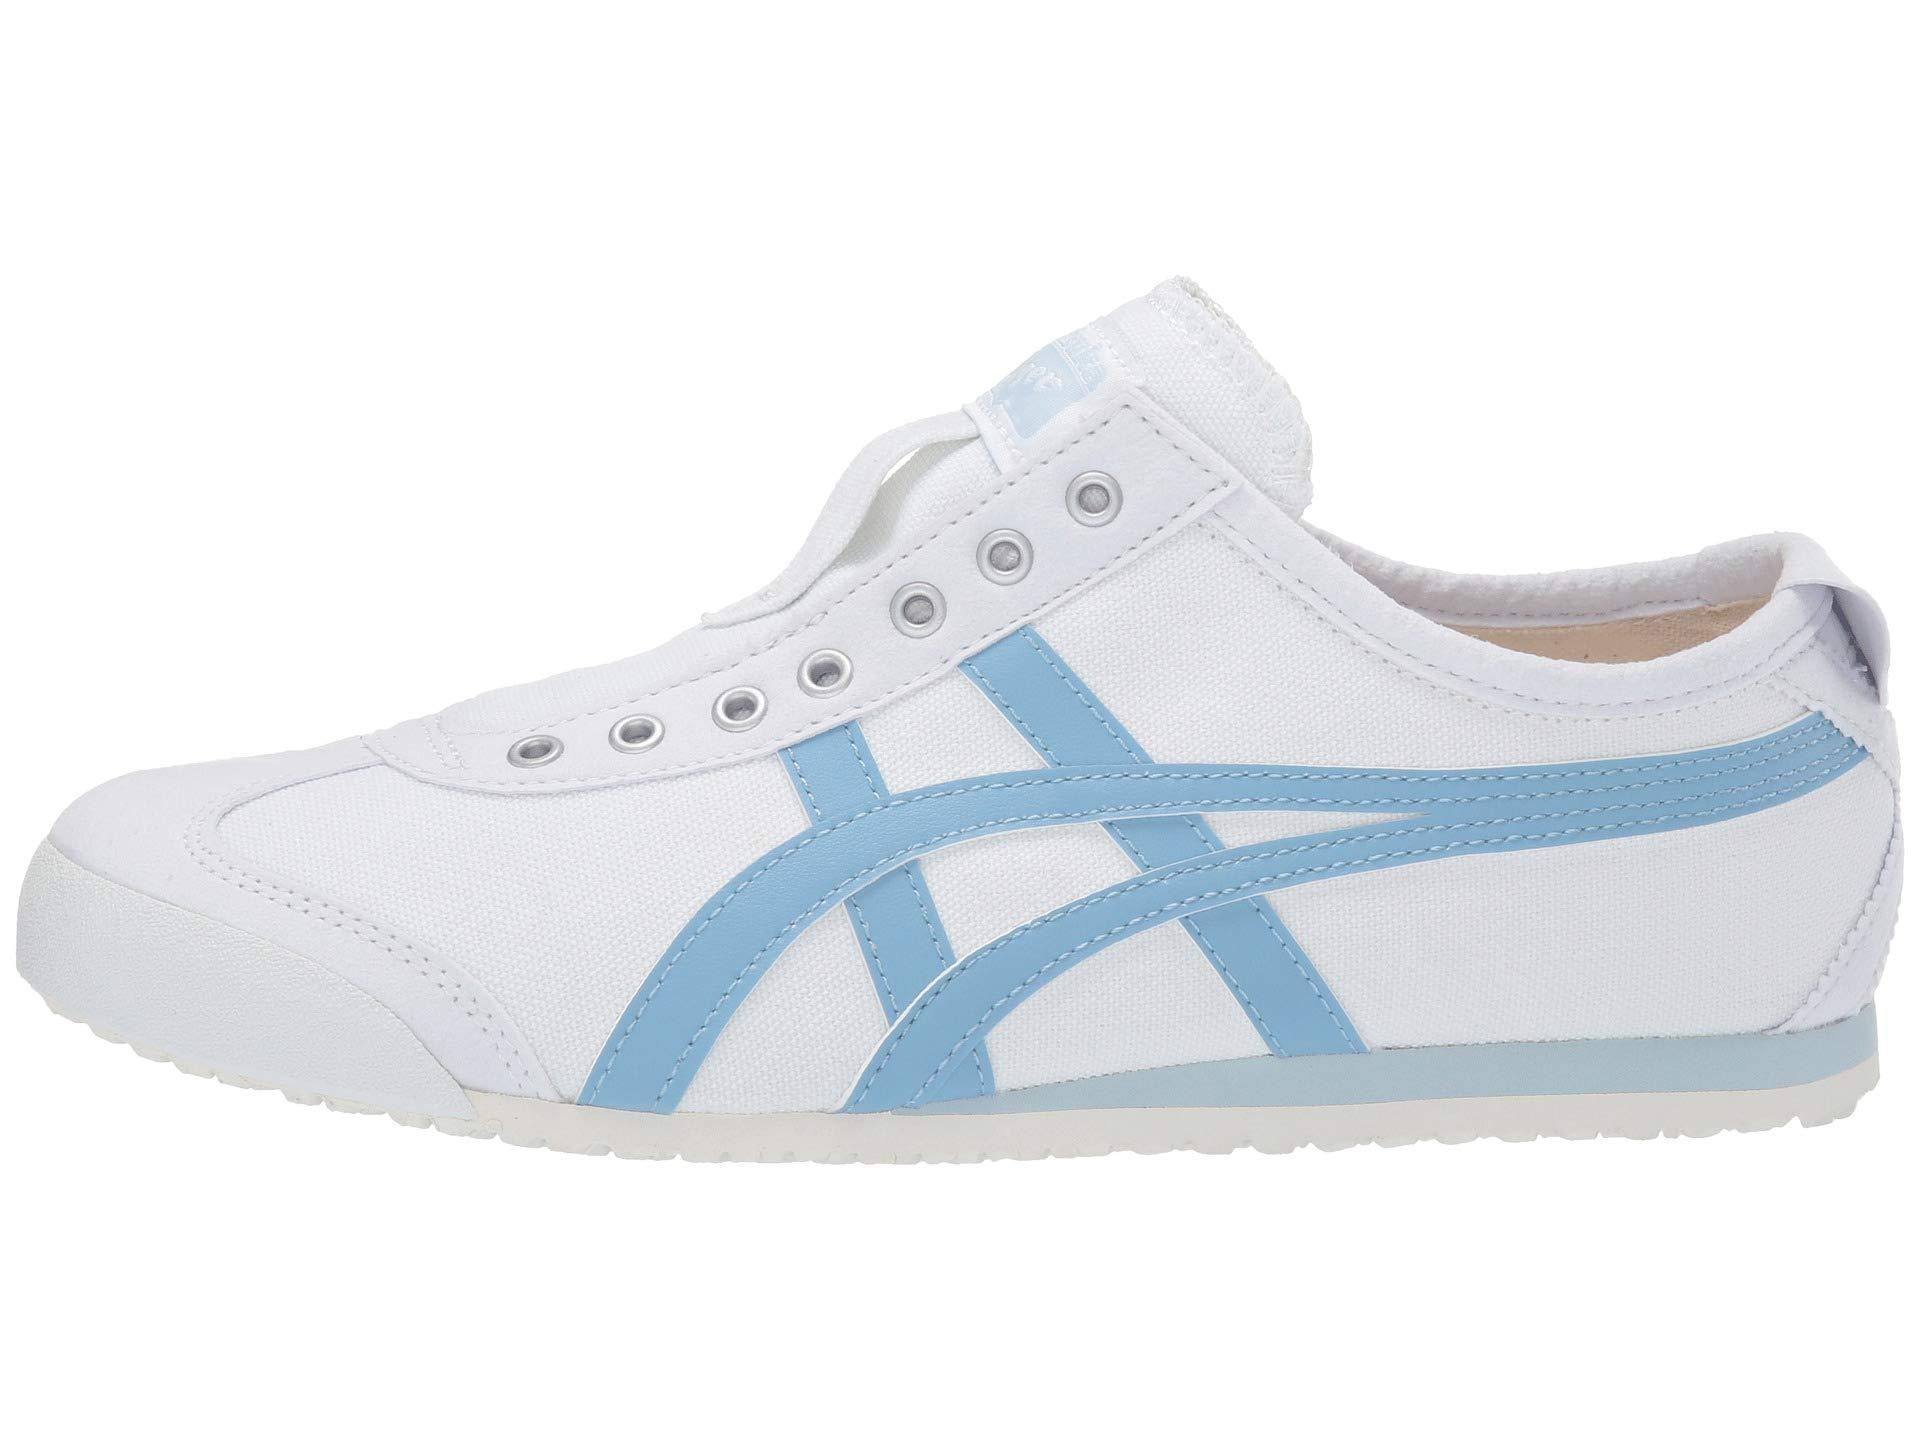 Onitsuka Tiger Lace Mexico 66 Slip On White Sienna Women S Shoes In White Blue Smoke Blue Lyst